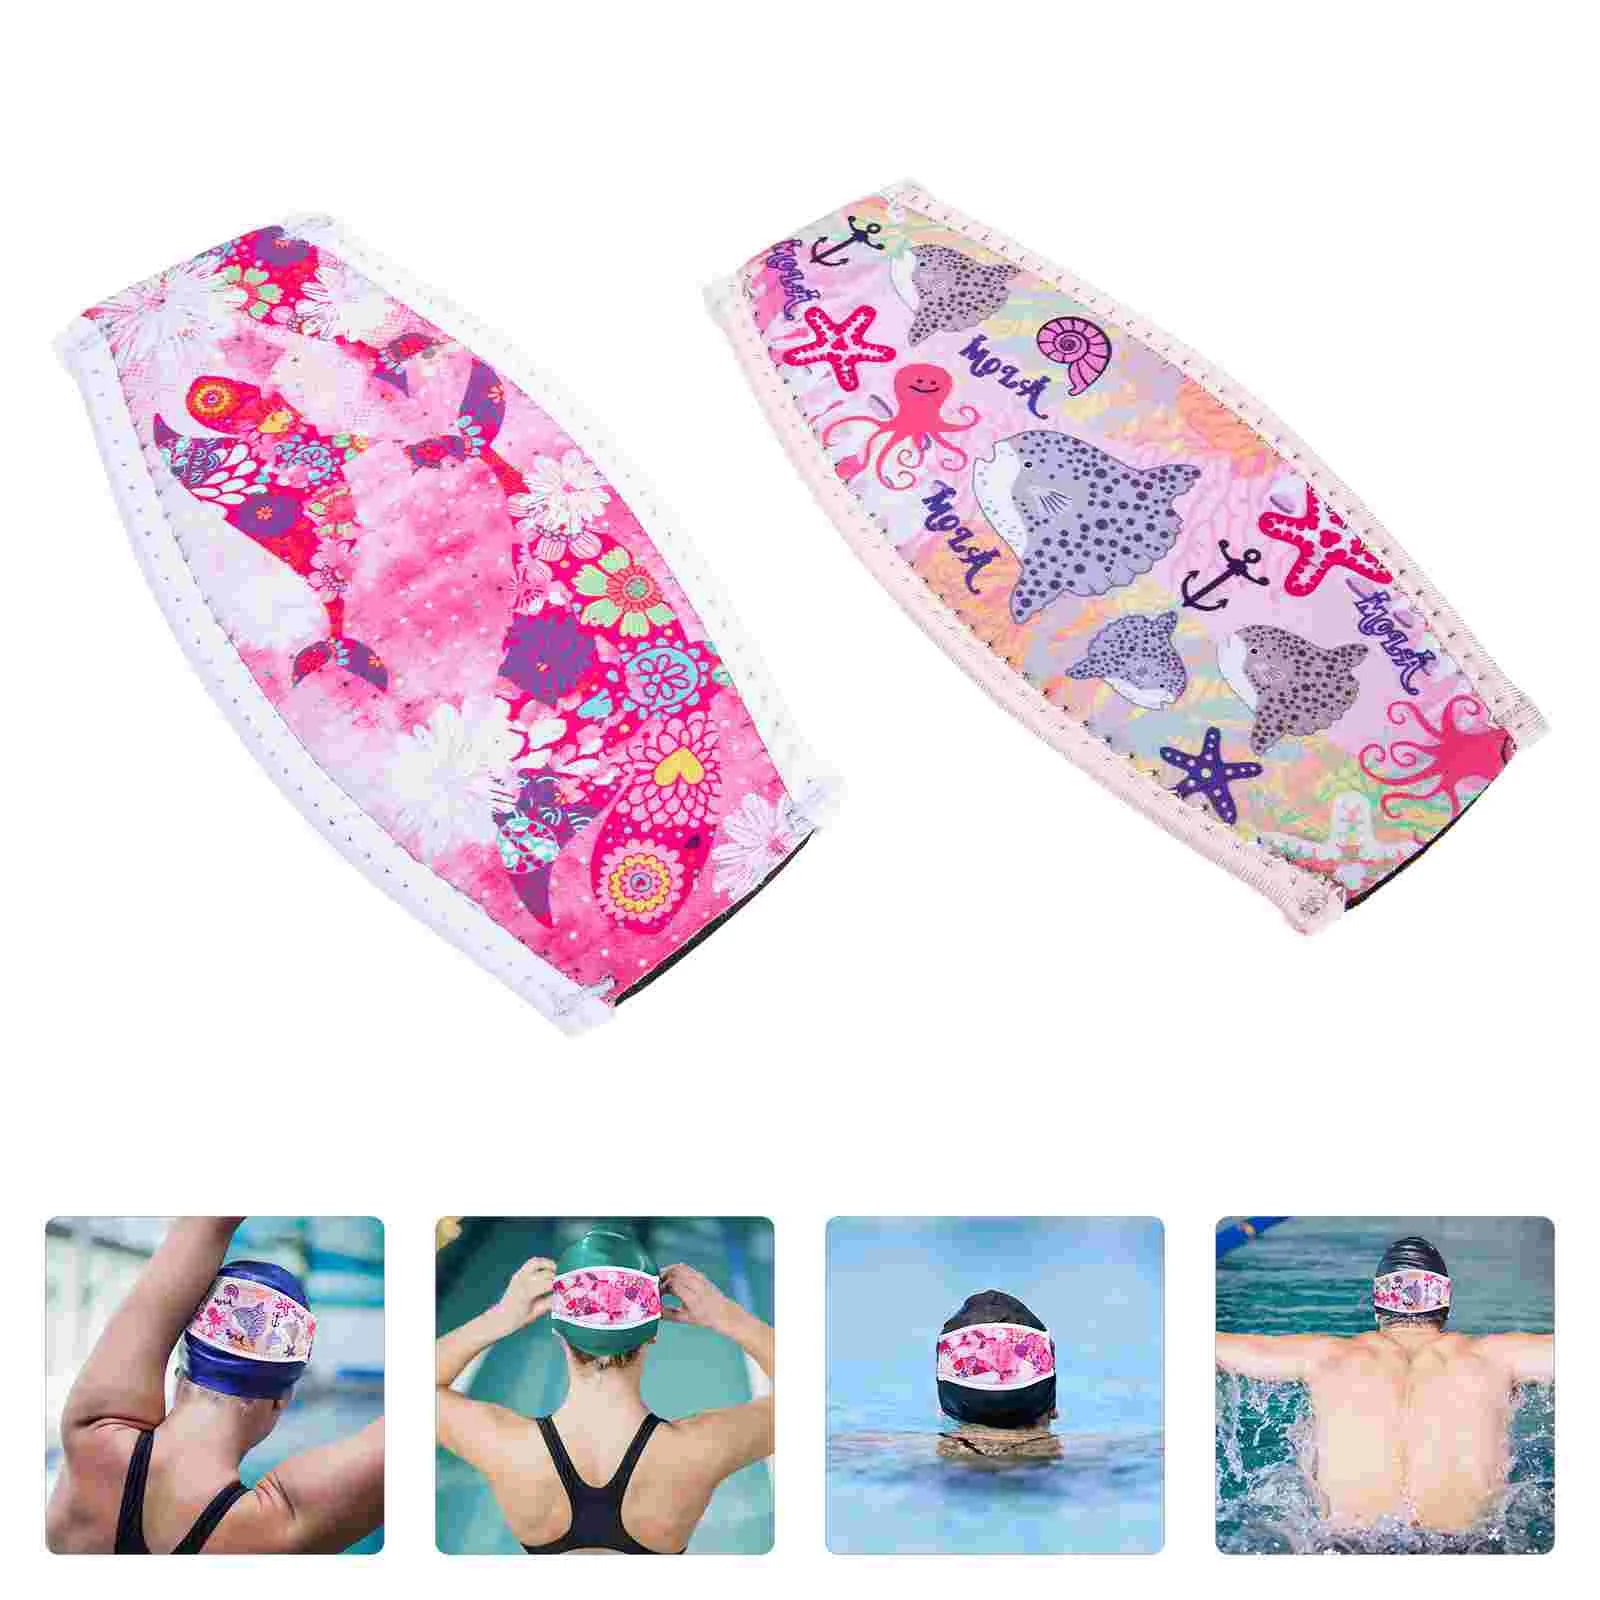 

Strap Cover Diving Dive Masks Neoprene Covers Swimming Straps Hair Snorkel Swim Protector Mask Goggle Wrapping Waterproof Slap